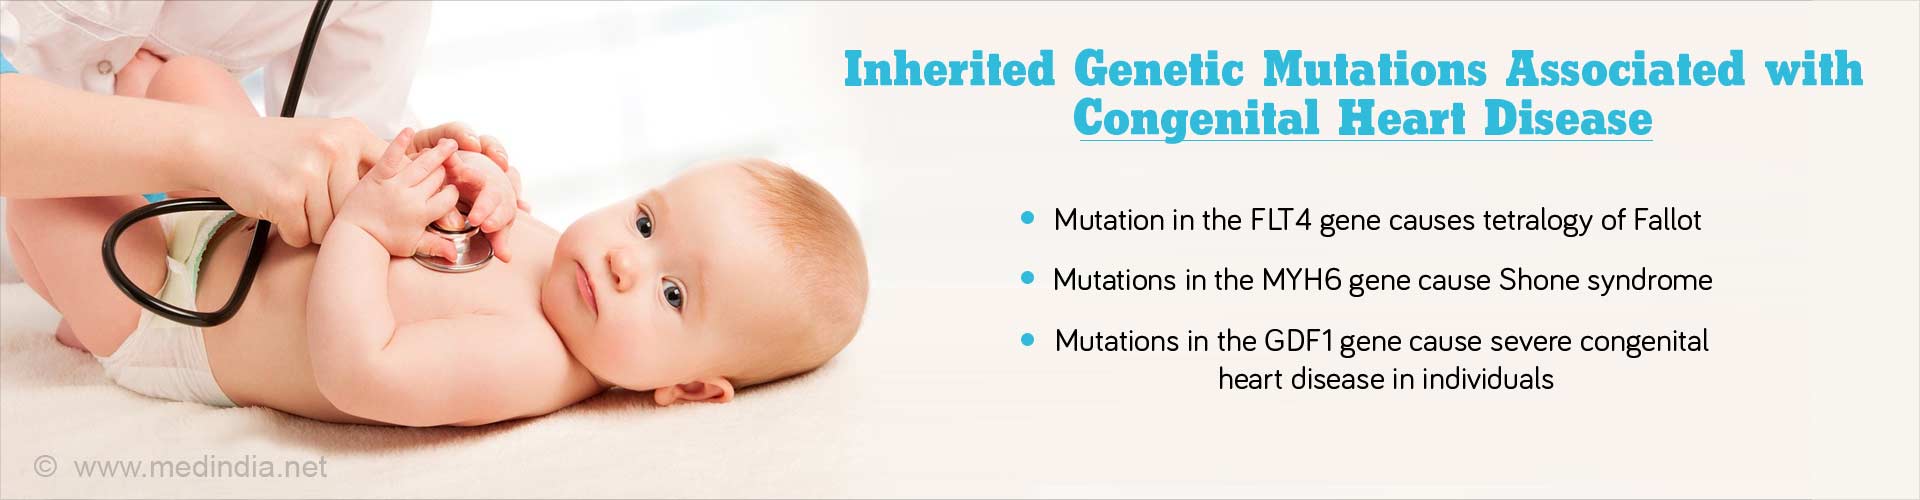 Inherited genetic mutations associated with congenital heart disease
- Mutation in the FLT4 gene causes tetralogy of fallot
- Mutations in the MYH6 genes causes Shone syndrome
- Mutations in the GDF1 genes cause severe congenital heart disease in individuals